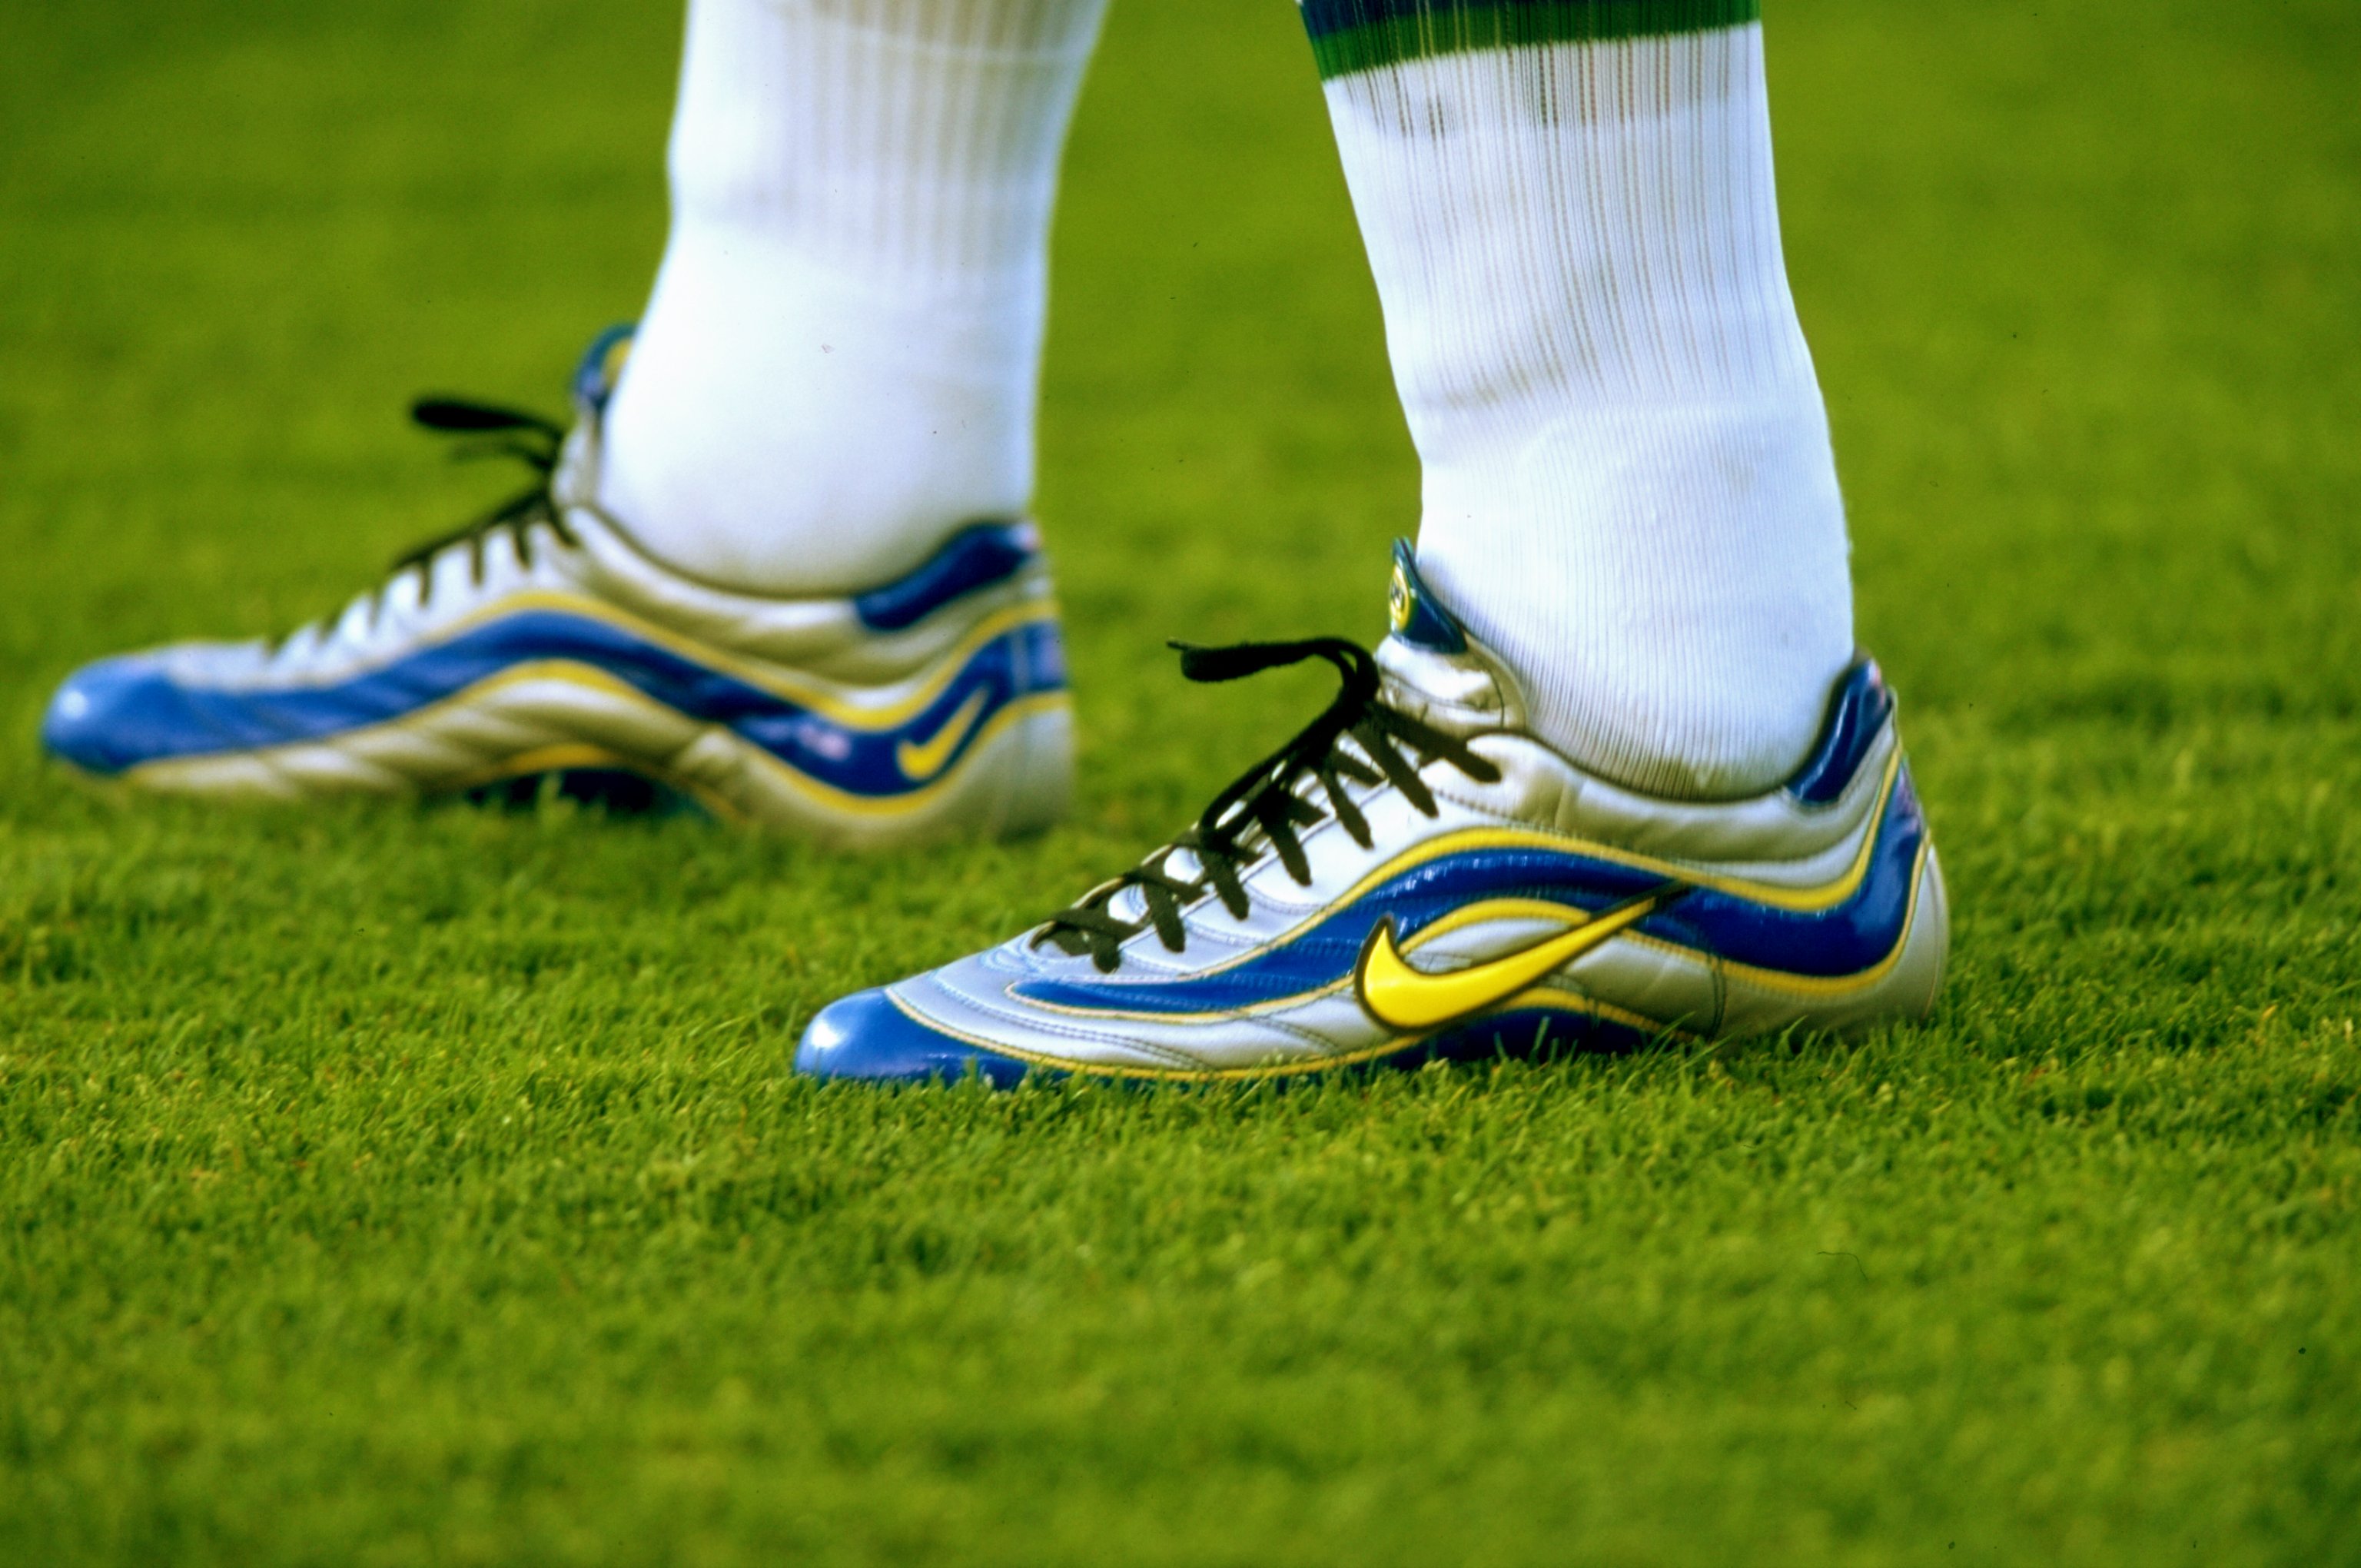 From Ronaldo S Classic Nike R9s To David Beckham S Adidas Predators Top 10 Football Boots Of All Time Sport360 News